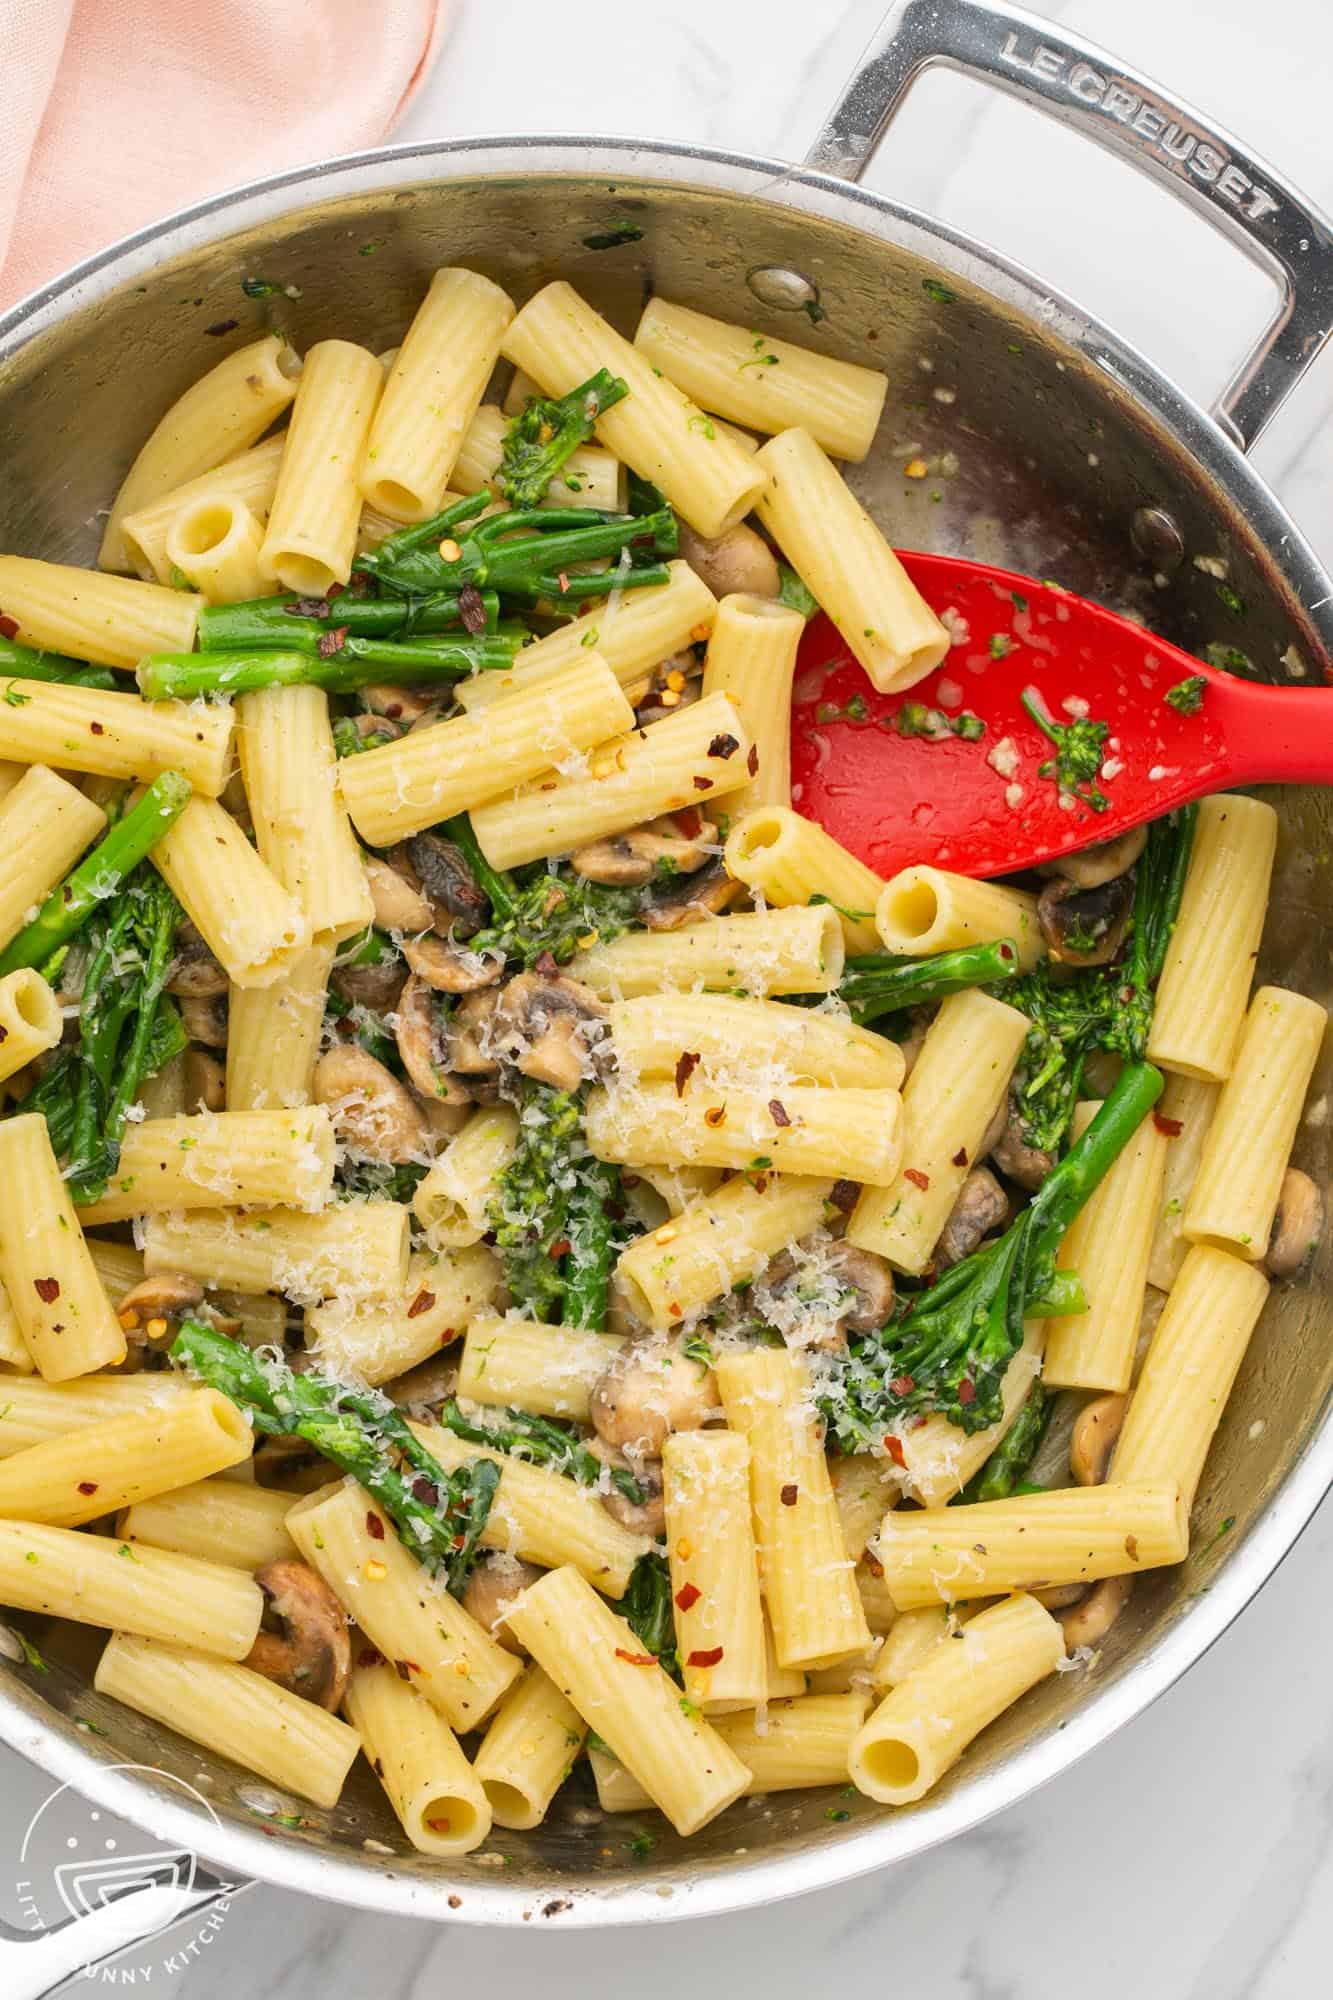 a stainless steel skillet holding rigatoni pasta with broccolini, mushrooms, and parmesan cheese. A red spoon is in the pan as well. 